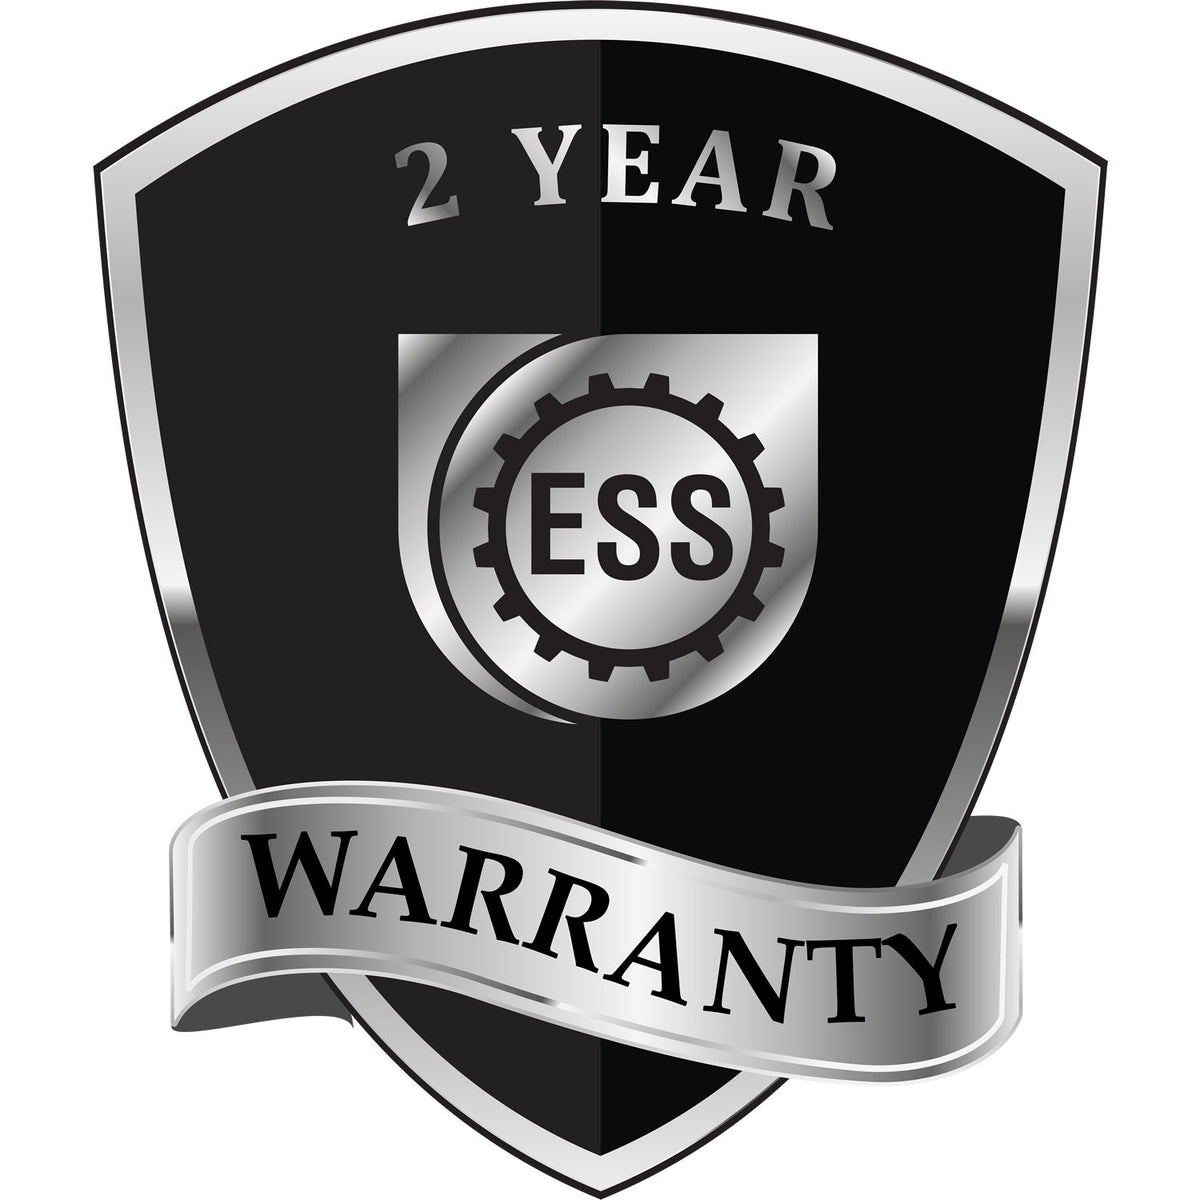 A badge or emblem showing a warranty icon for the Heavy Duty Cast Iron Tennessee Engineer Seal Embosser